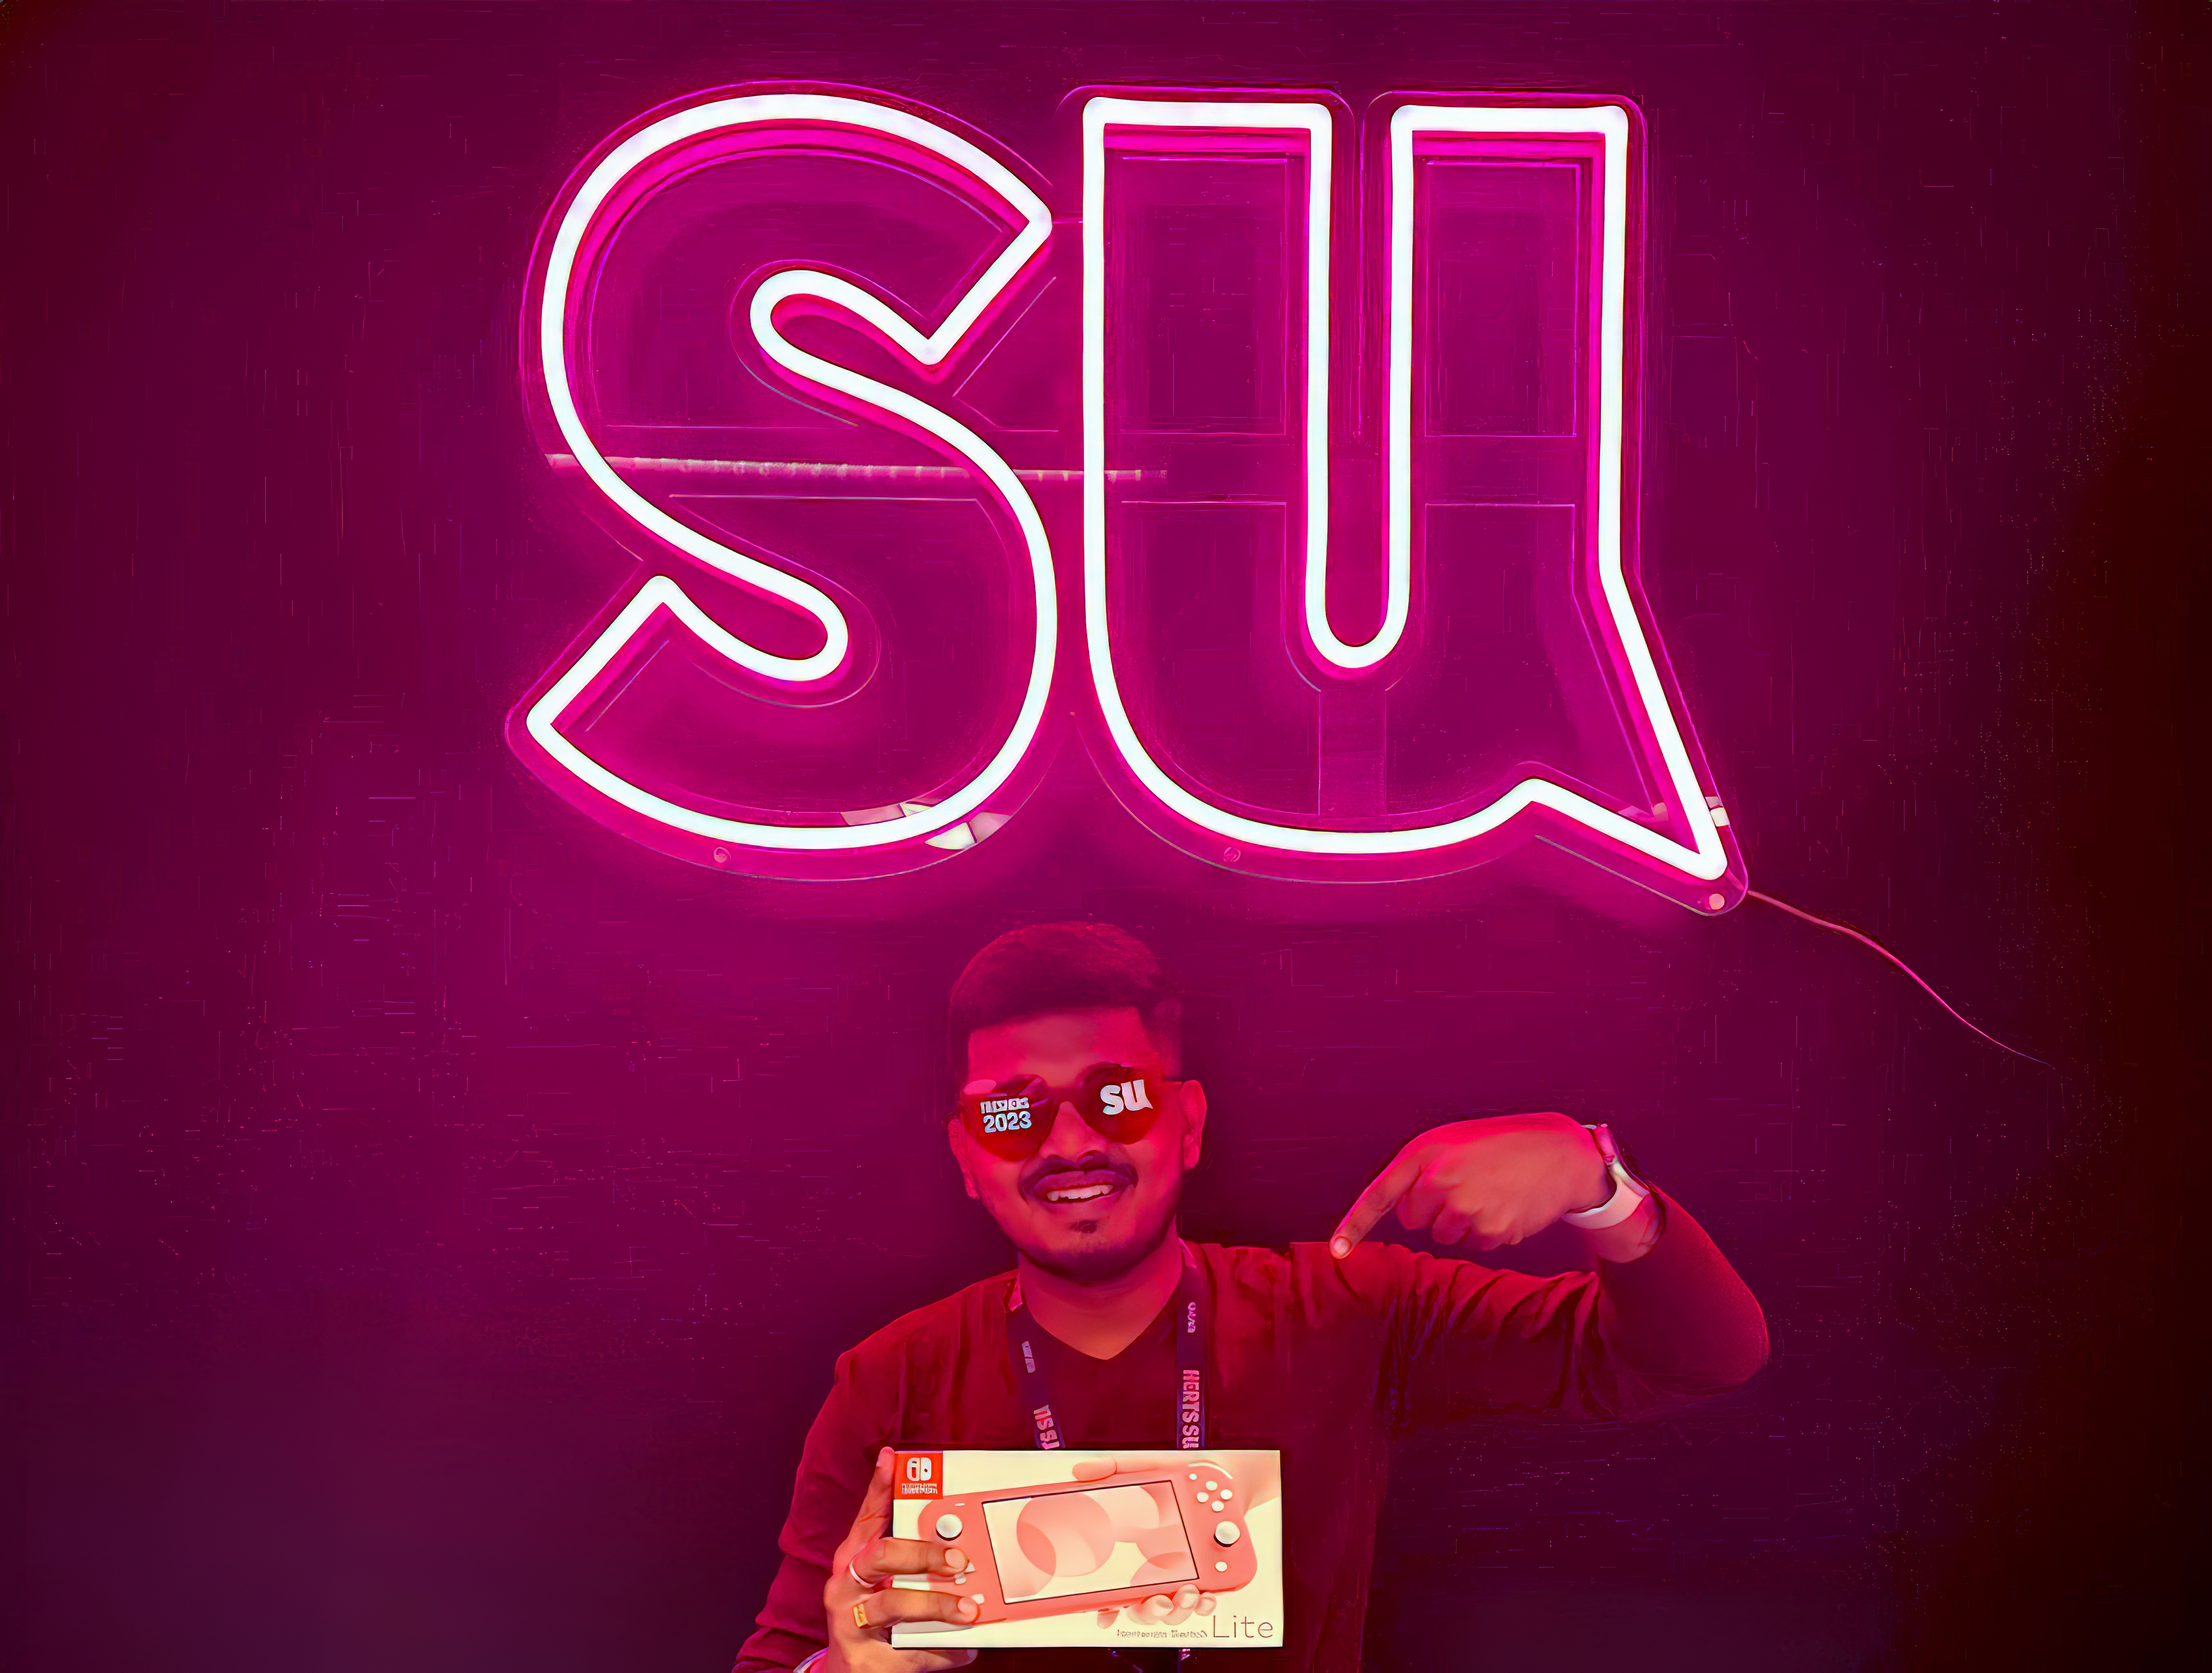 A student holding a boxed Nintendo Switch, part of a giveaway on HertsSU instagram. He's in front of a bright pink neon version of the 'SU' logo, with the speech mark tail on the letter U. He's also wearing branded Herts SU sunglasses and lanyard